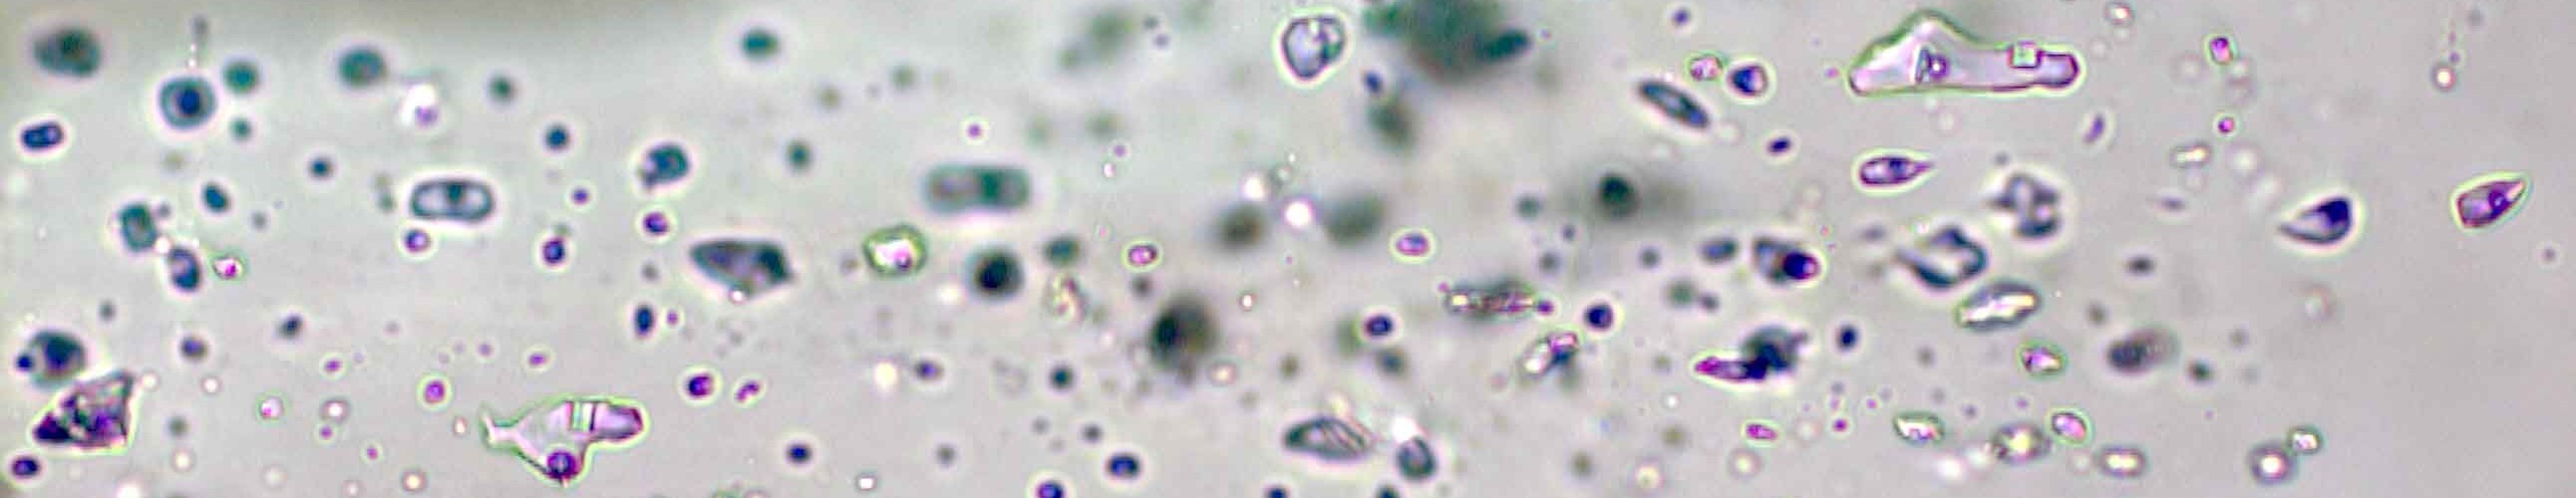 Fluid inclusions image 2 - triphase x50